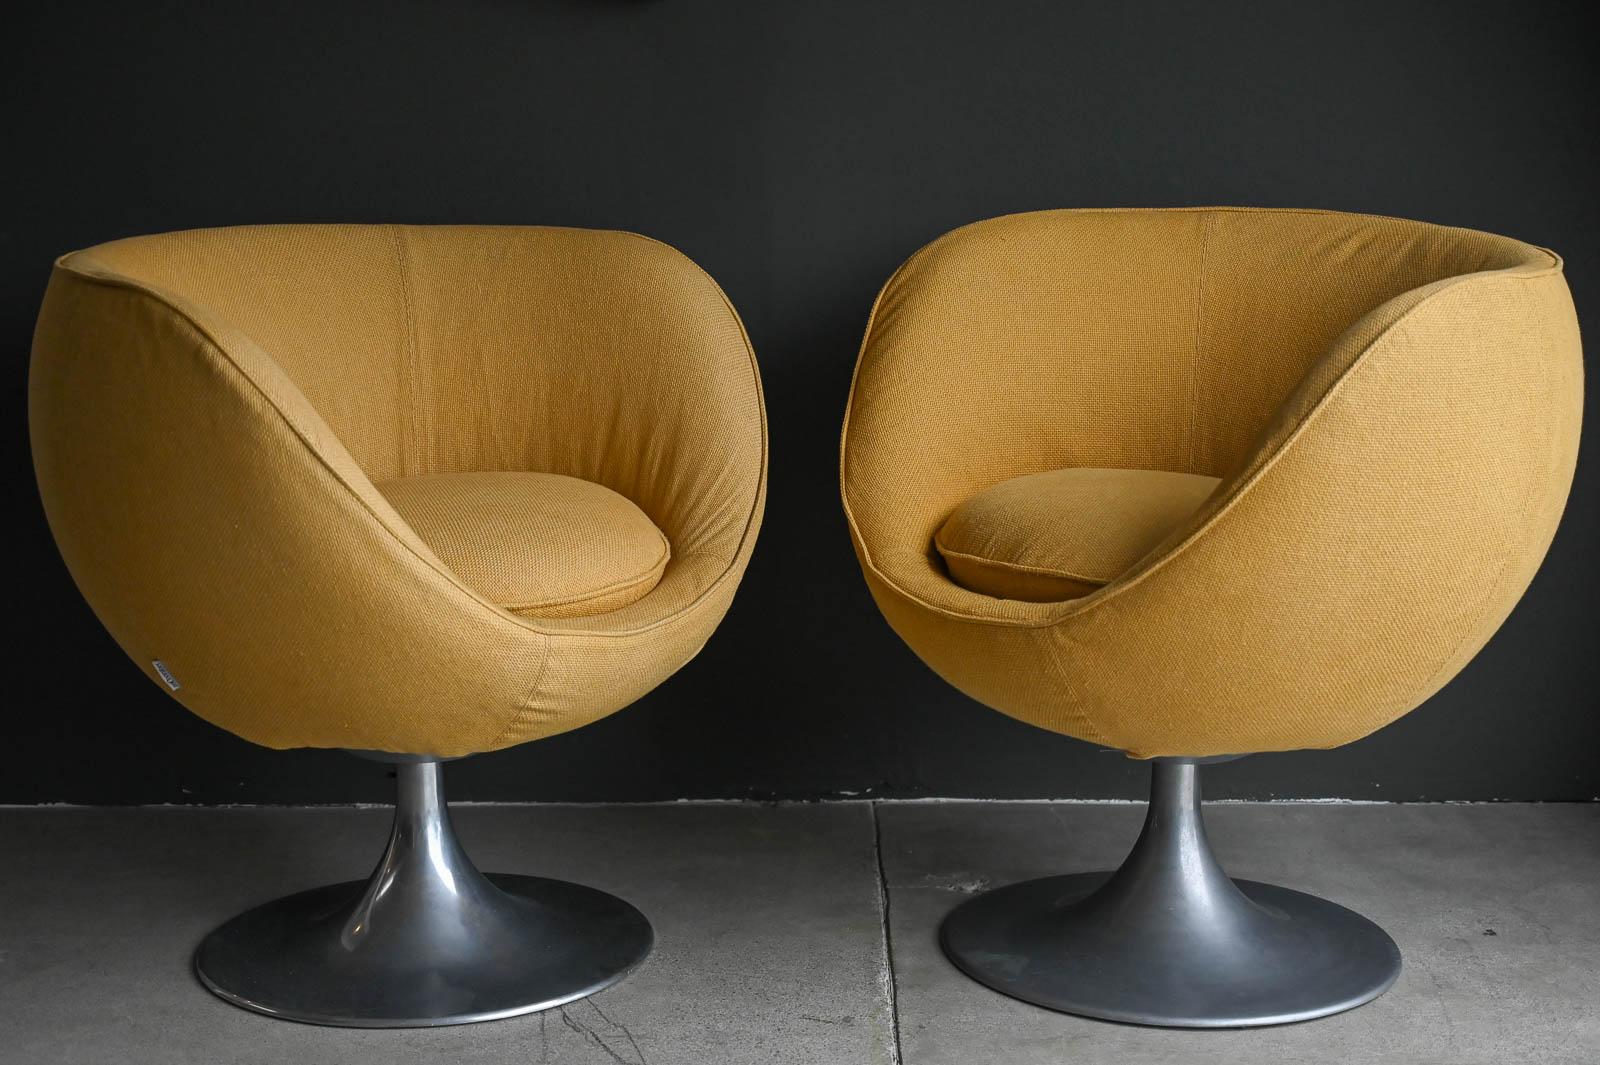 Pair of Swivel Lounge Chairs by mCconfort, Italy, ca. 1990.  Very comfortable lounge chairs with swivel mechanism and cast aluminum bases.  Covers have been cleaned and are easily removable.  Fabric is a nice neutral mustard color with great tweed